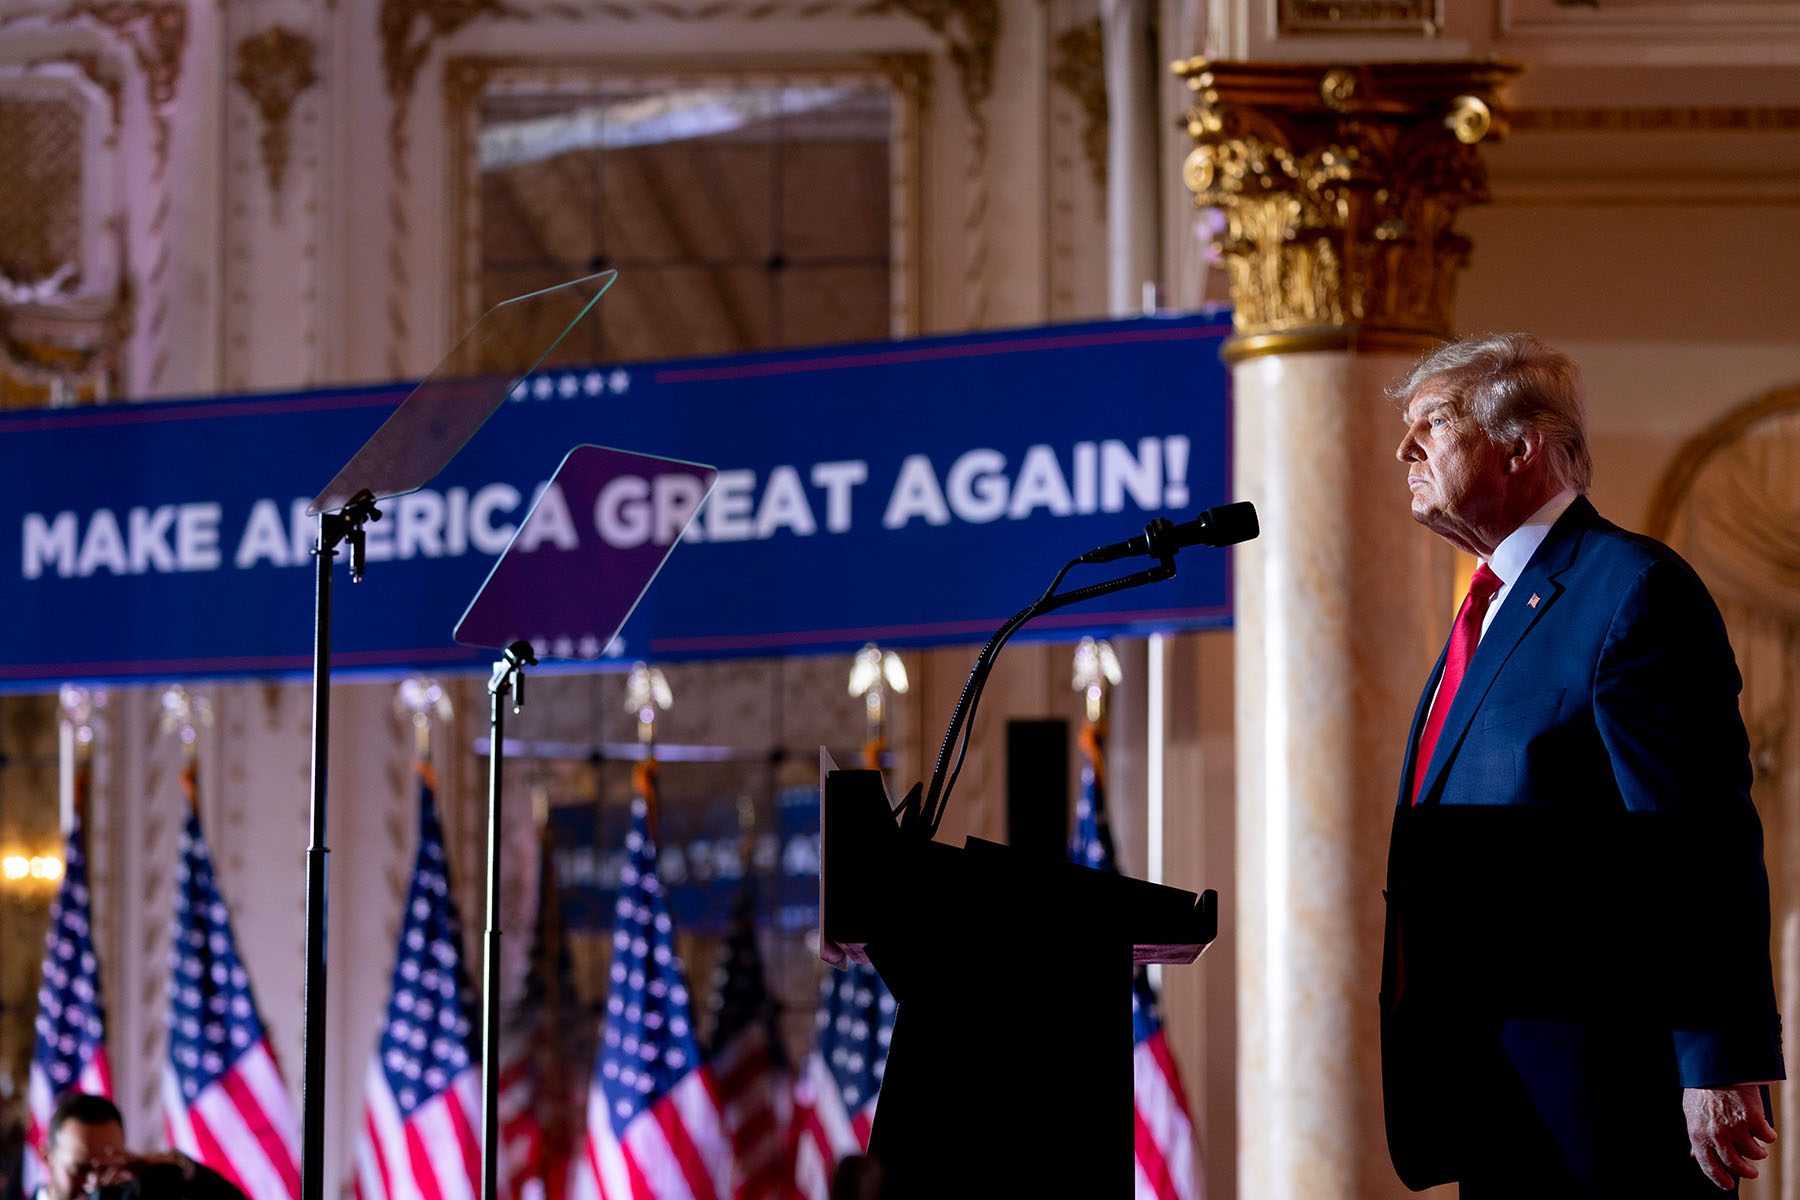 Former President Trump stands at a podium as he announces his third run for president. Behind him, a giant banner reads "Make American Great Again!"